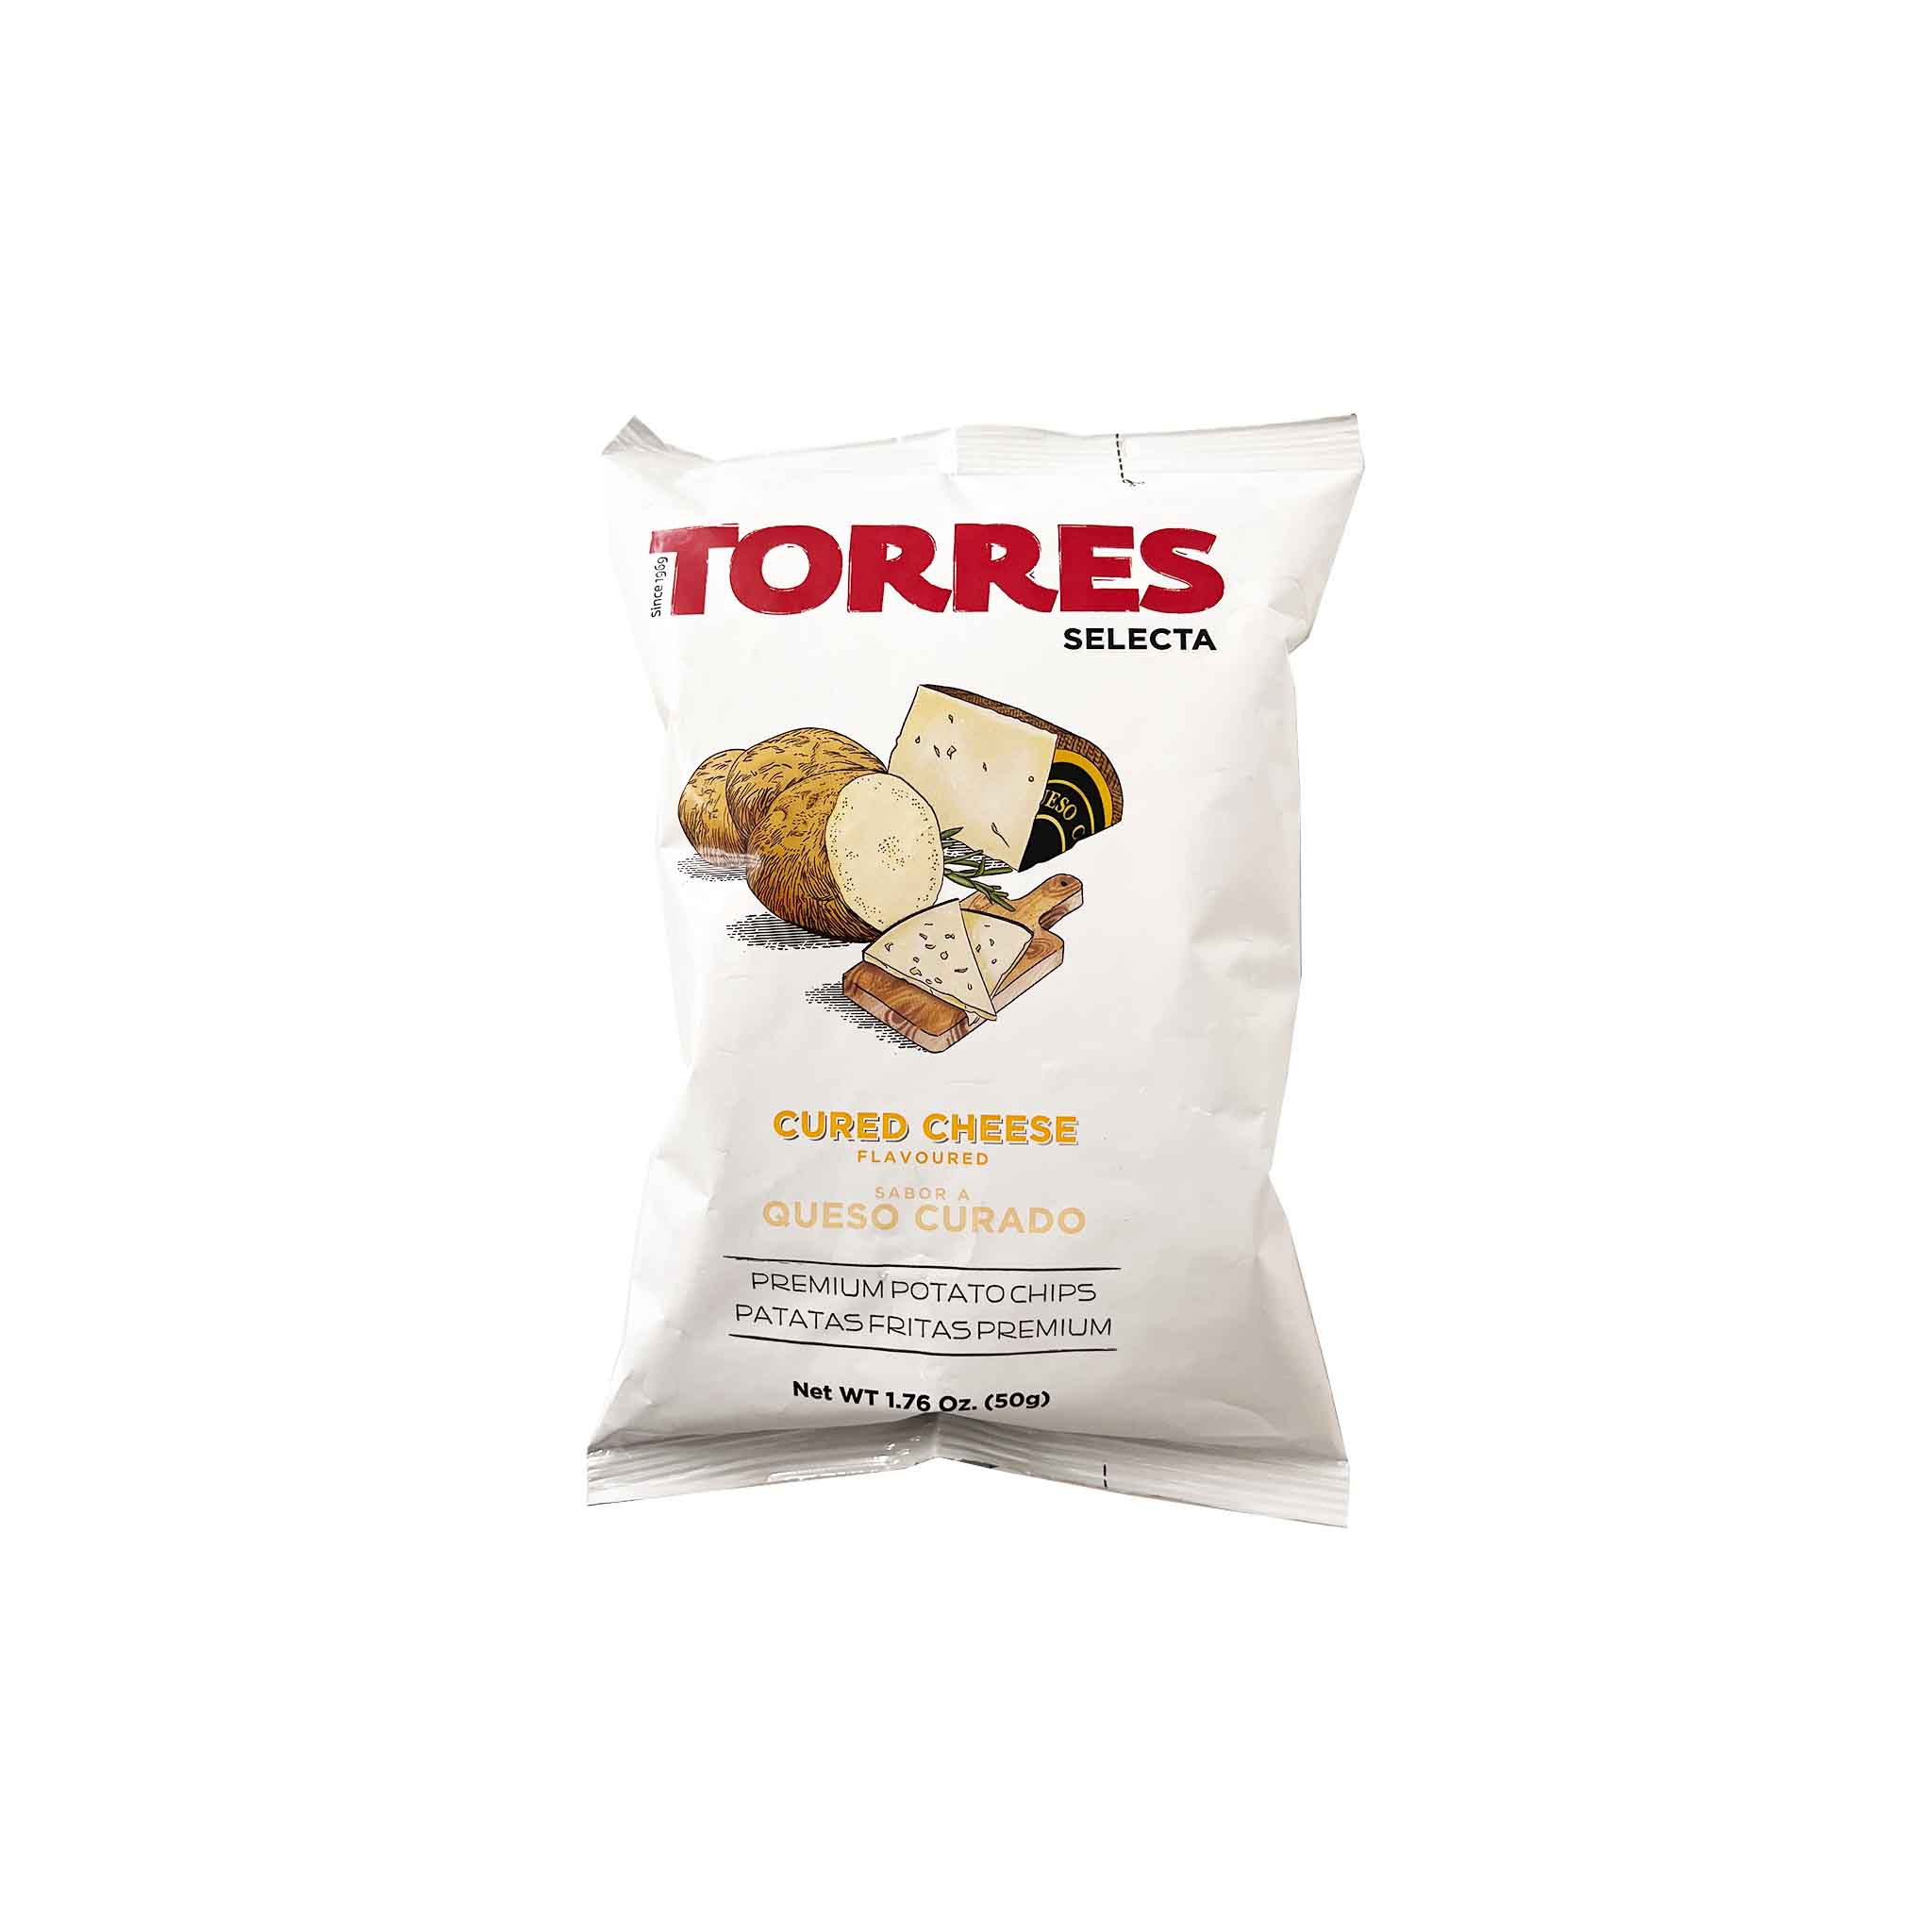 TORRES CURED CHEESE CHIPS 50g